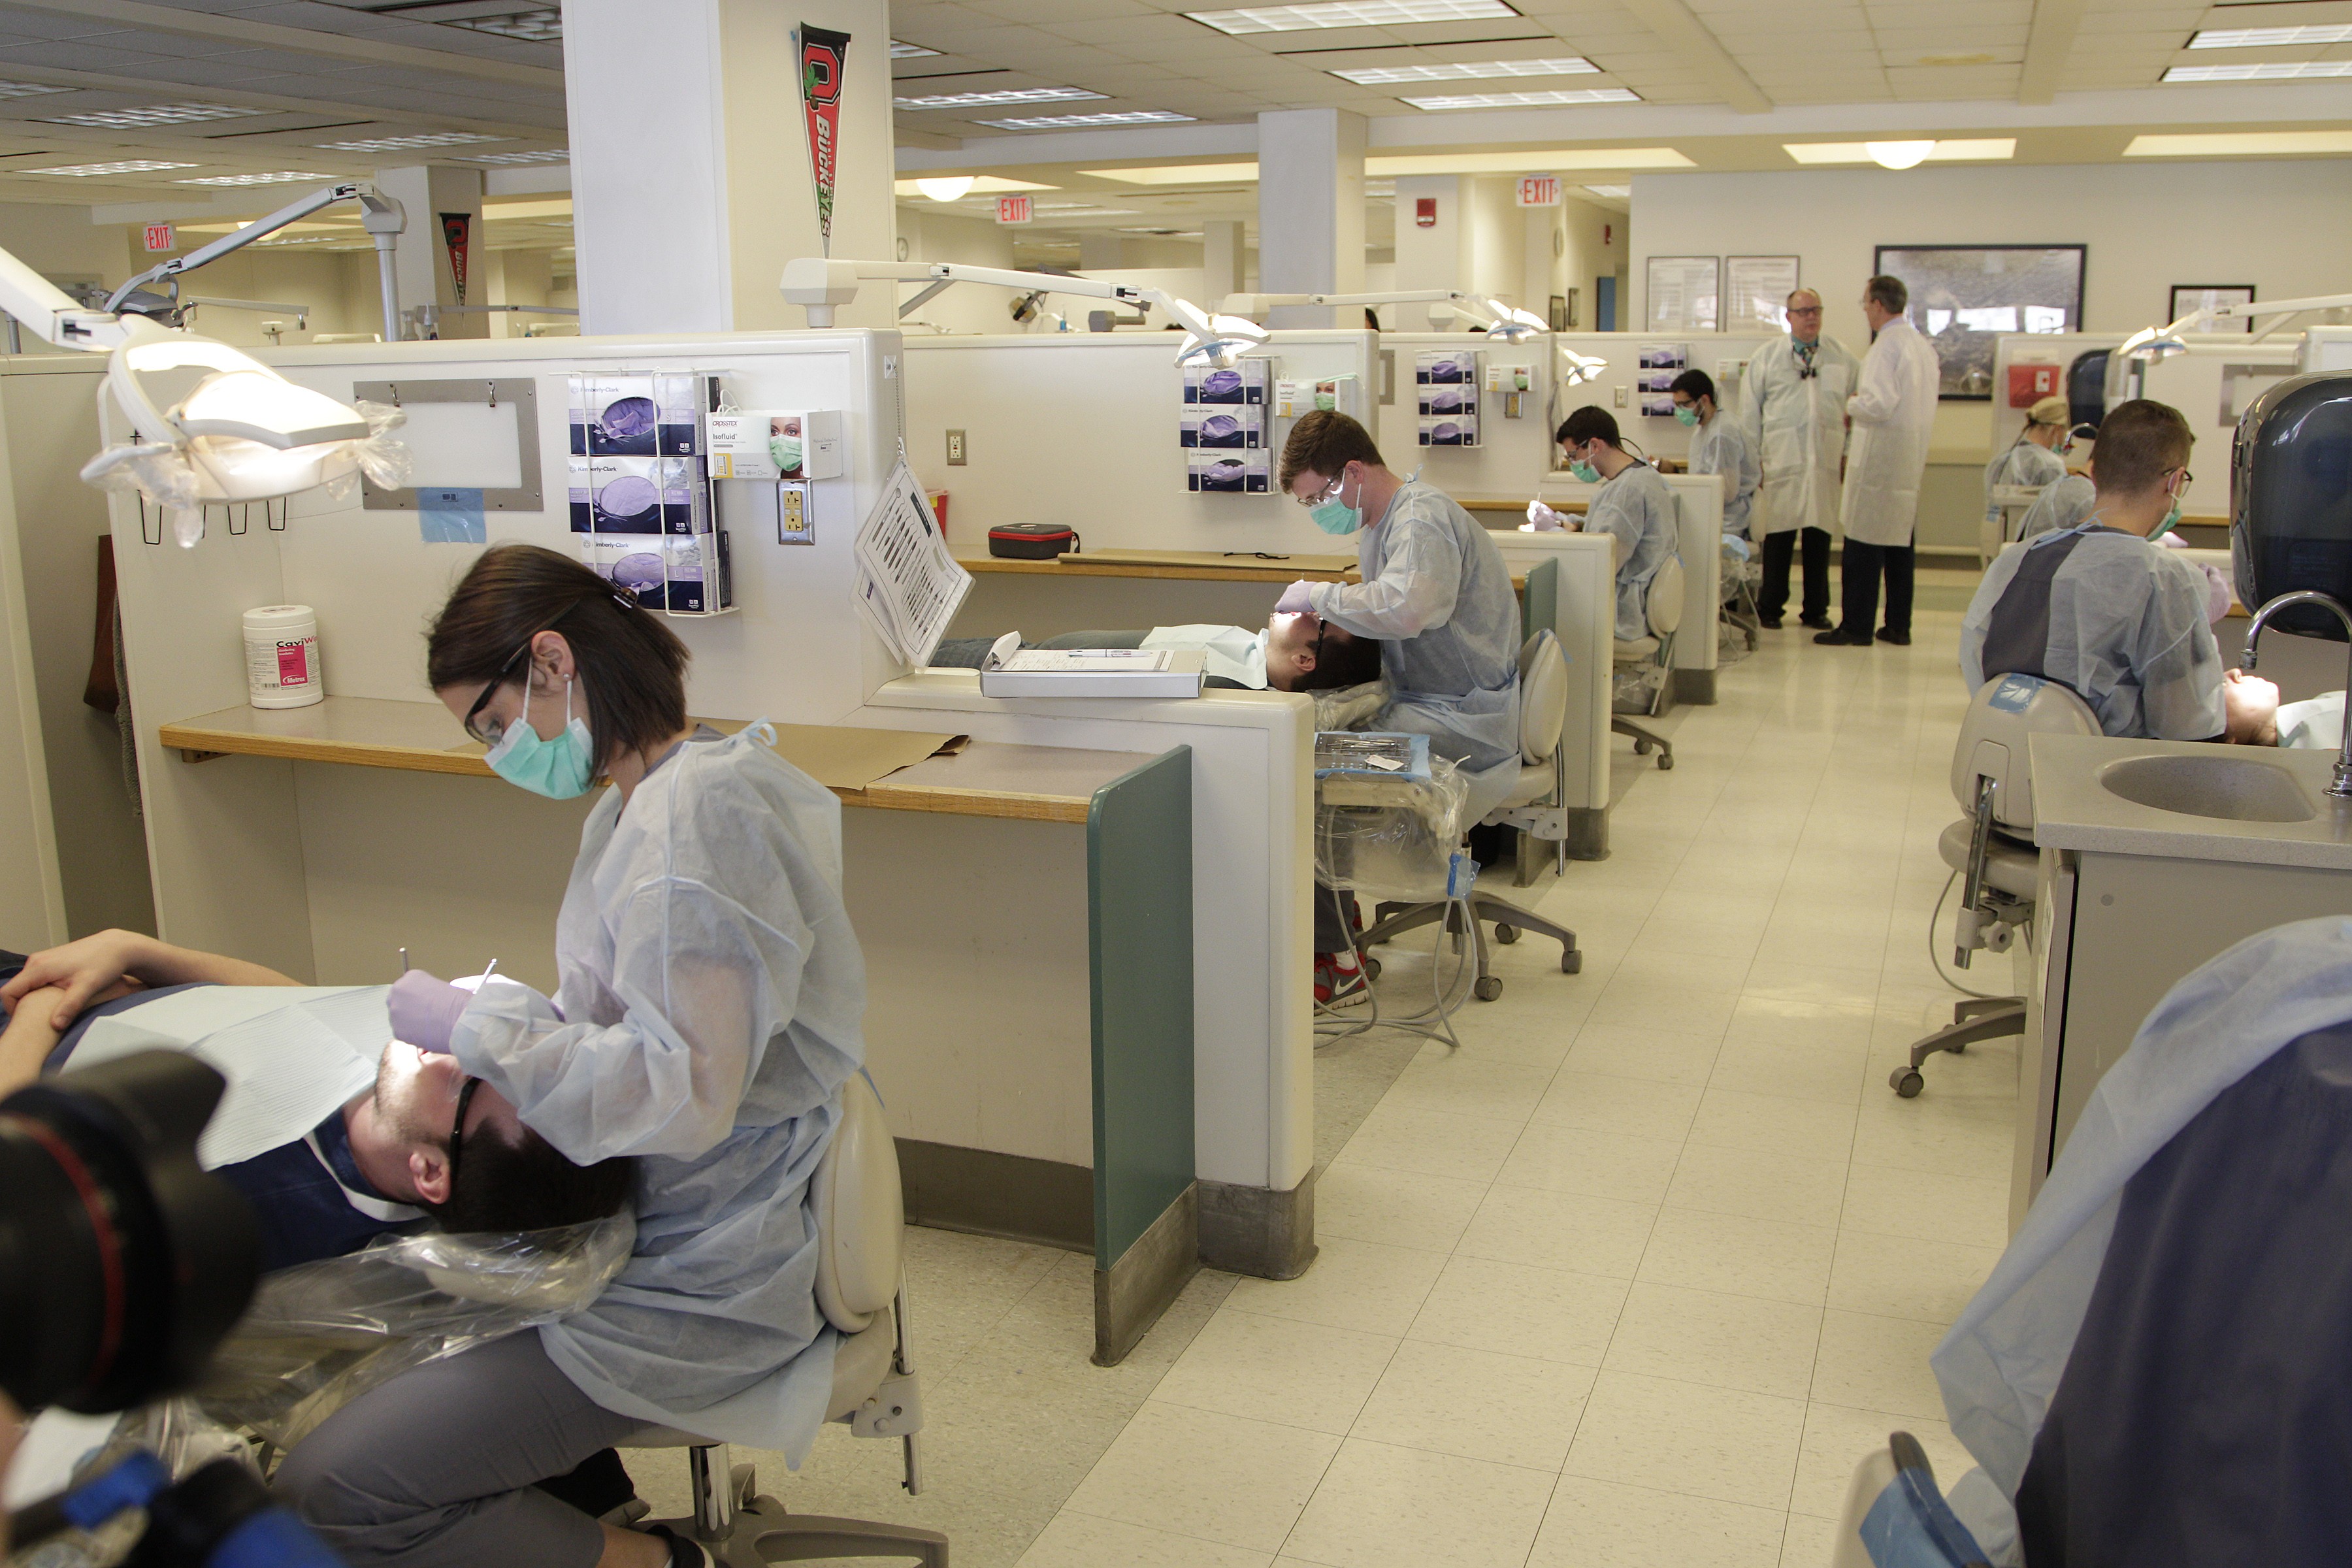 The Ohio State University College of Dentistry | LinkedIn